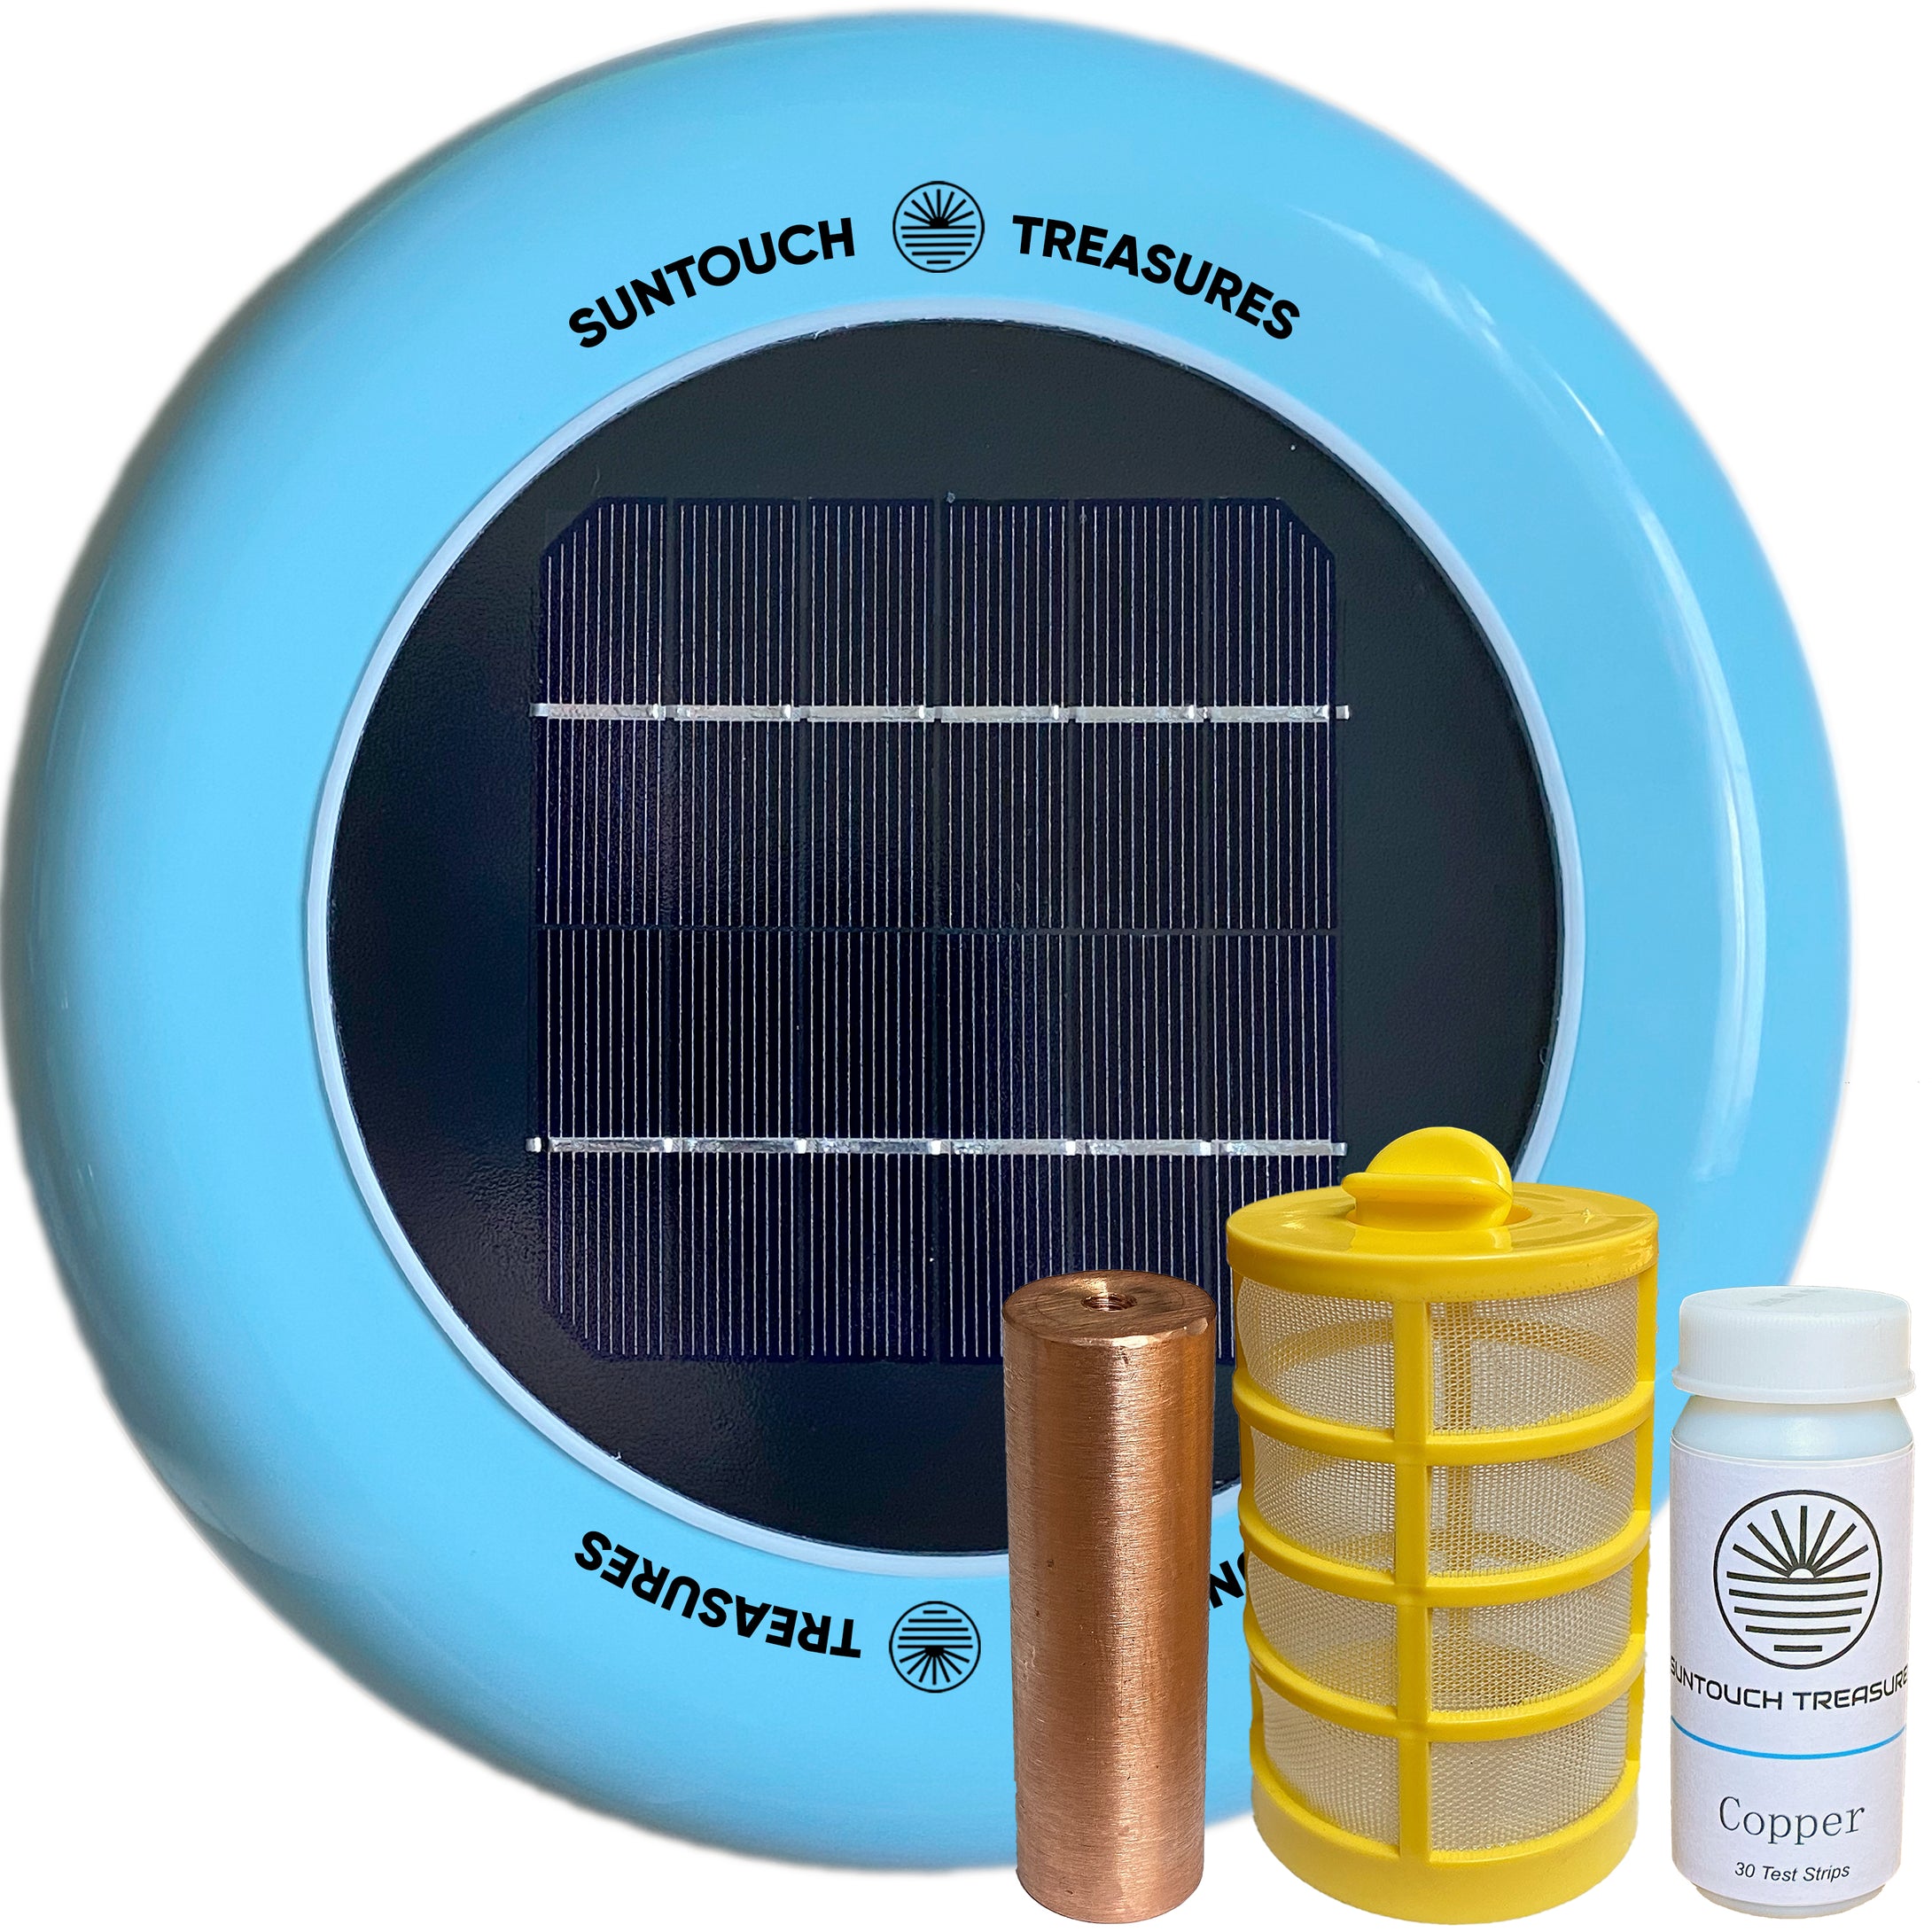 SUNTOUCH TREASURES SOLAR POOL MAID IONIZER - HIGH CAPACITY UP TO 45,000 gallons